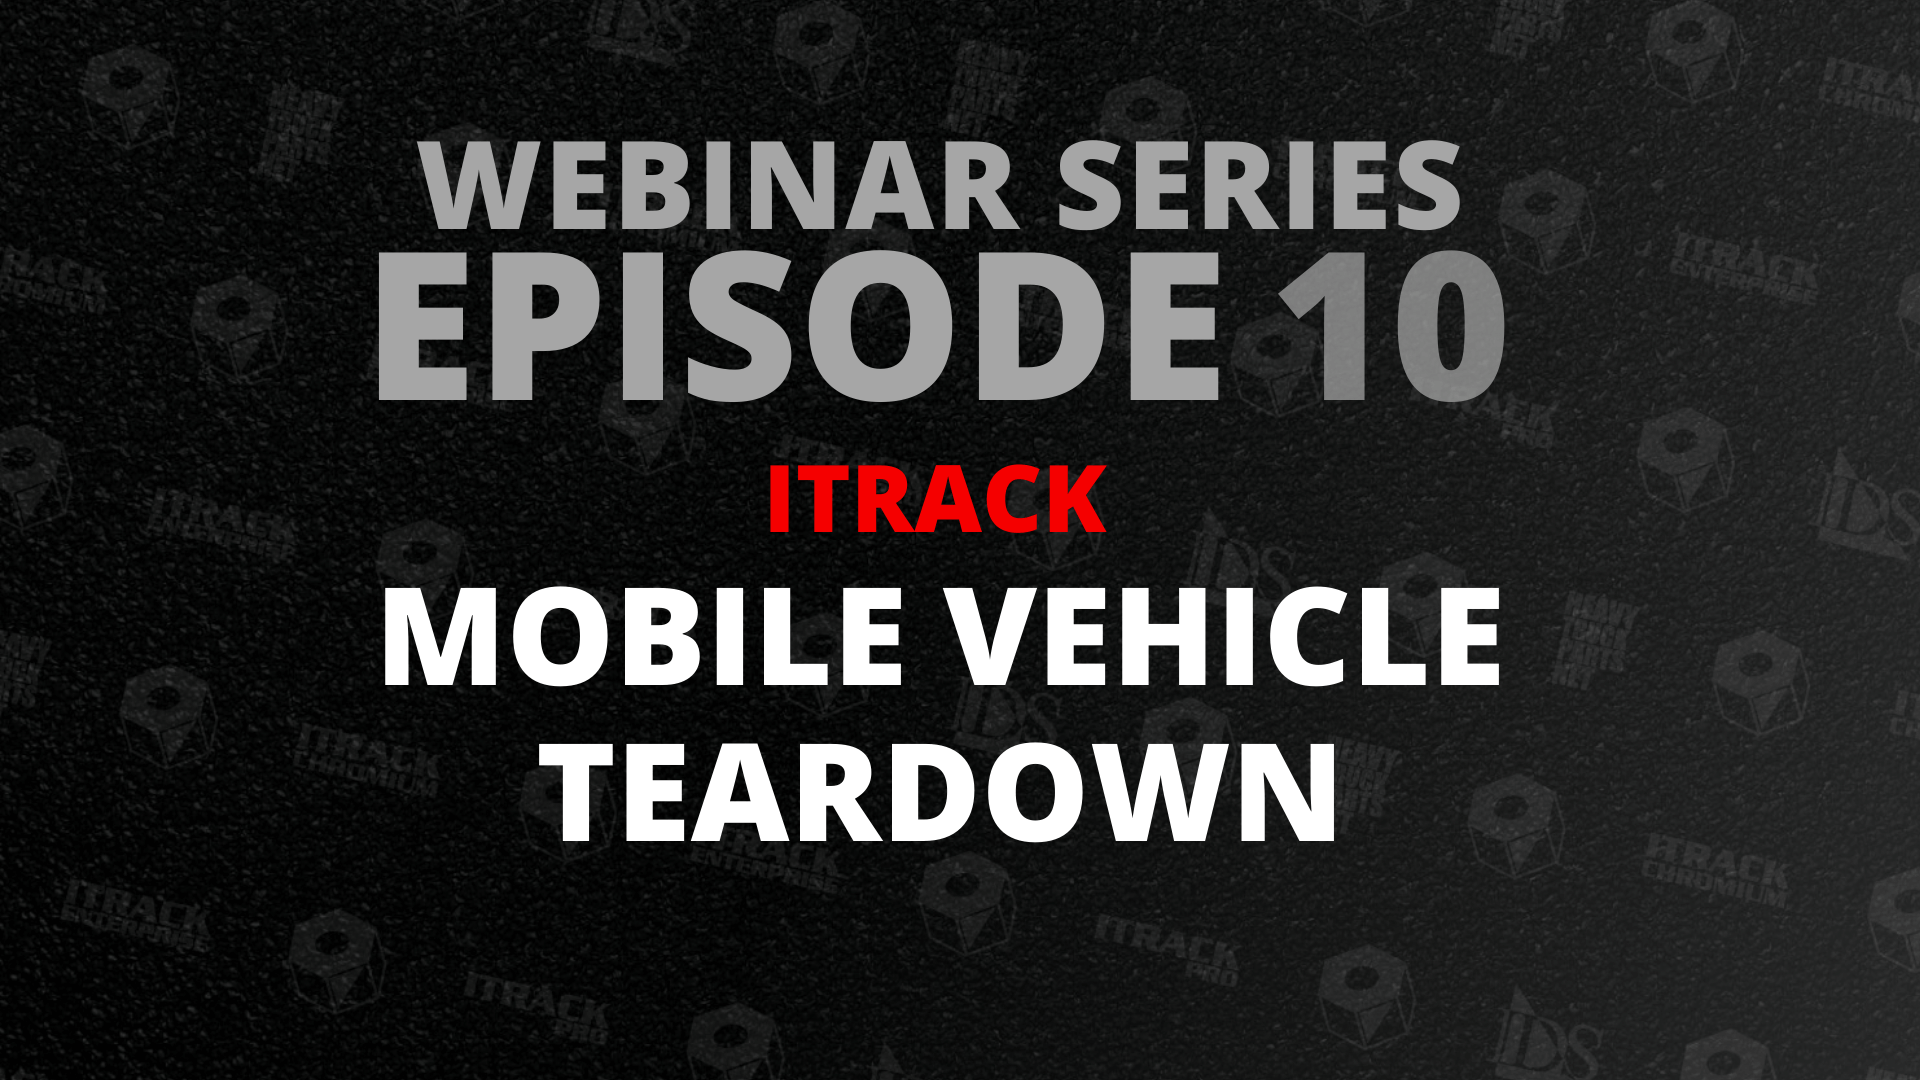 Featured image for “Mobile Vehicle Teardown”